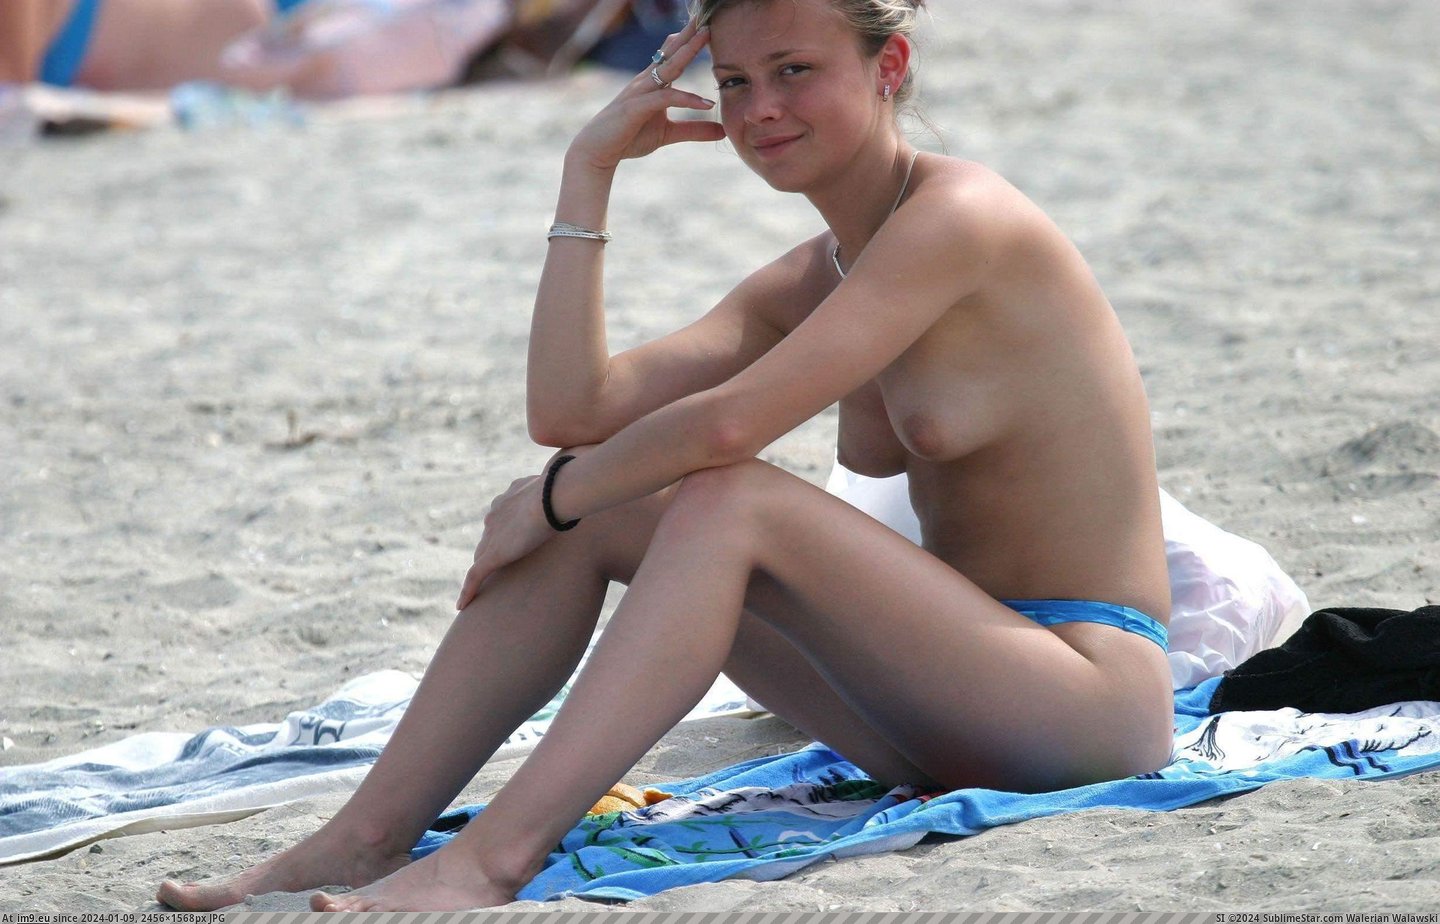 #Teens  #Topless best-of-topless-teens-131-3 Pic. (Image of album Strictly Topless))